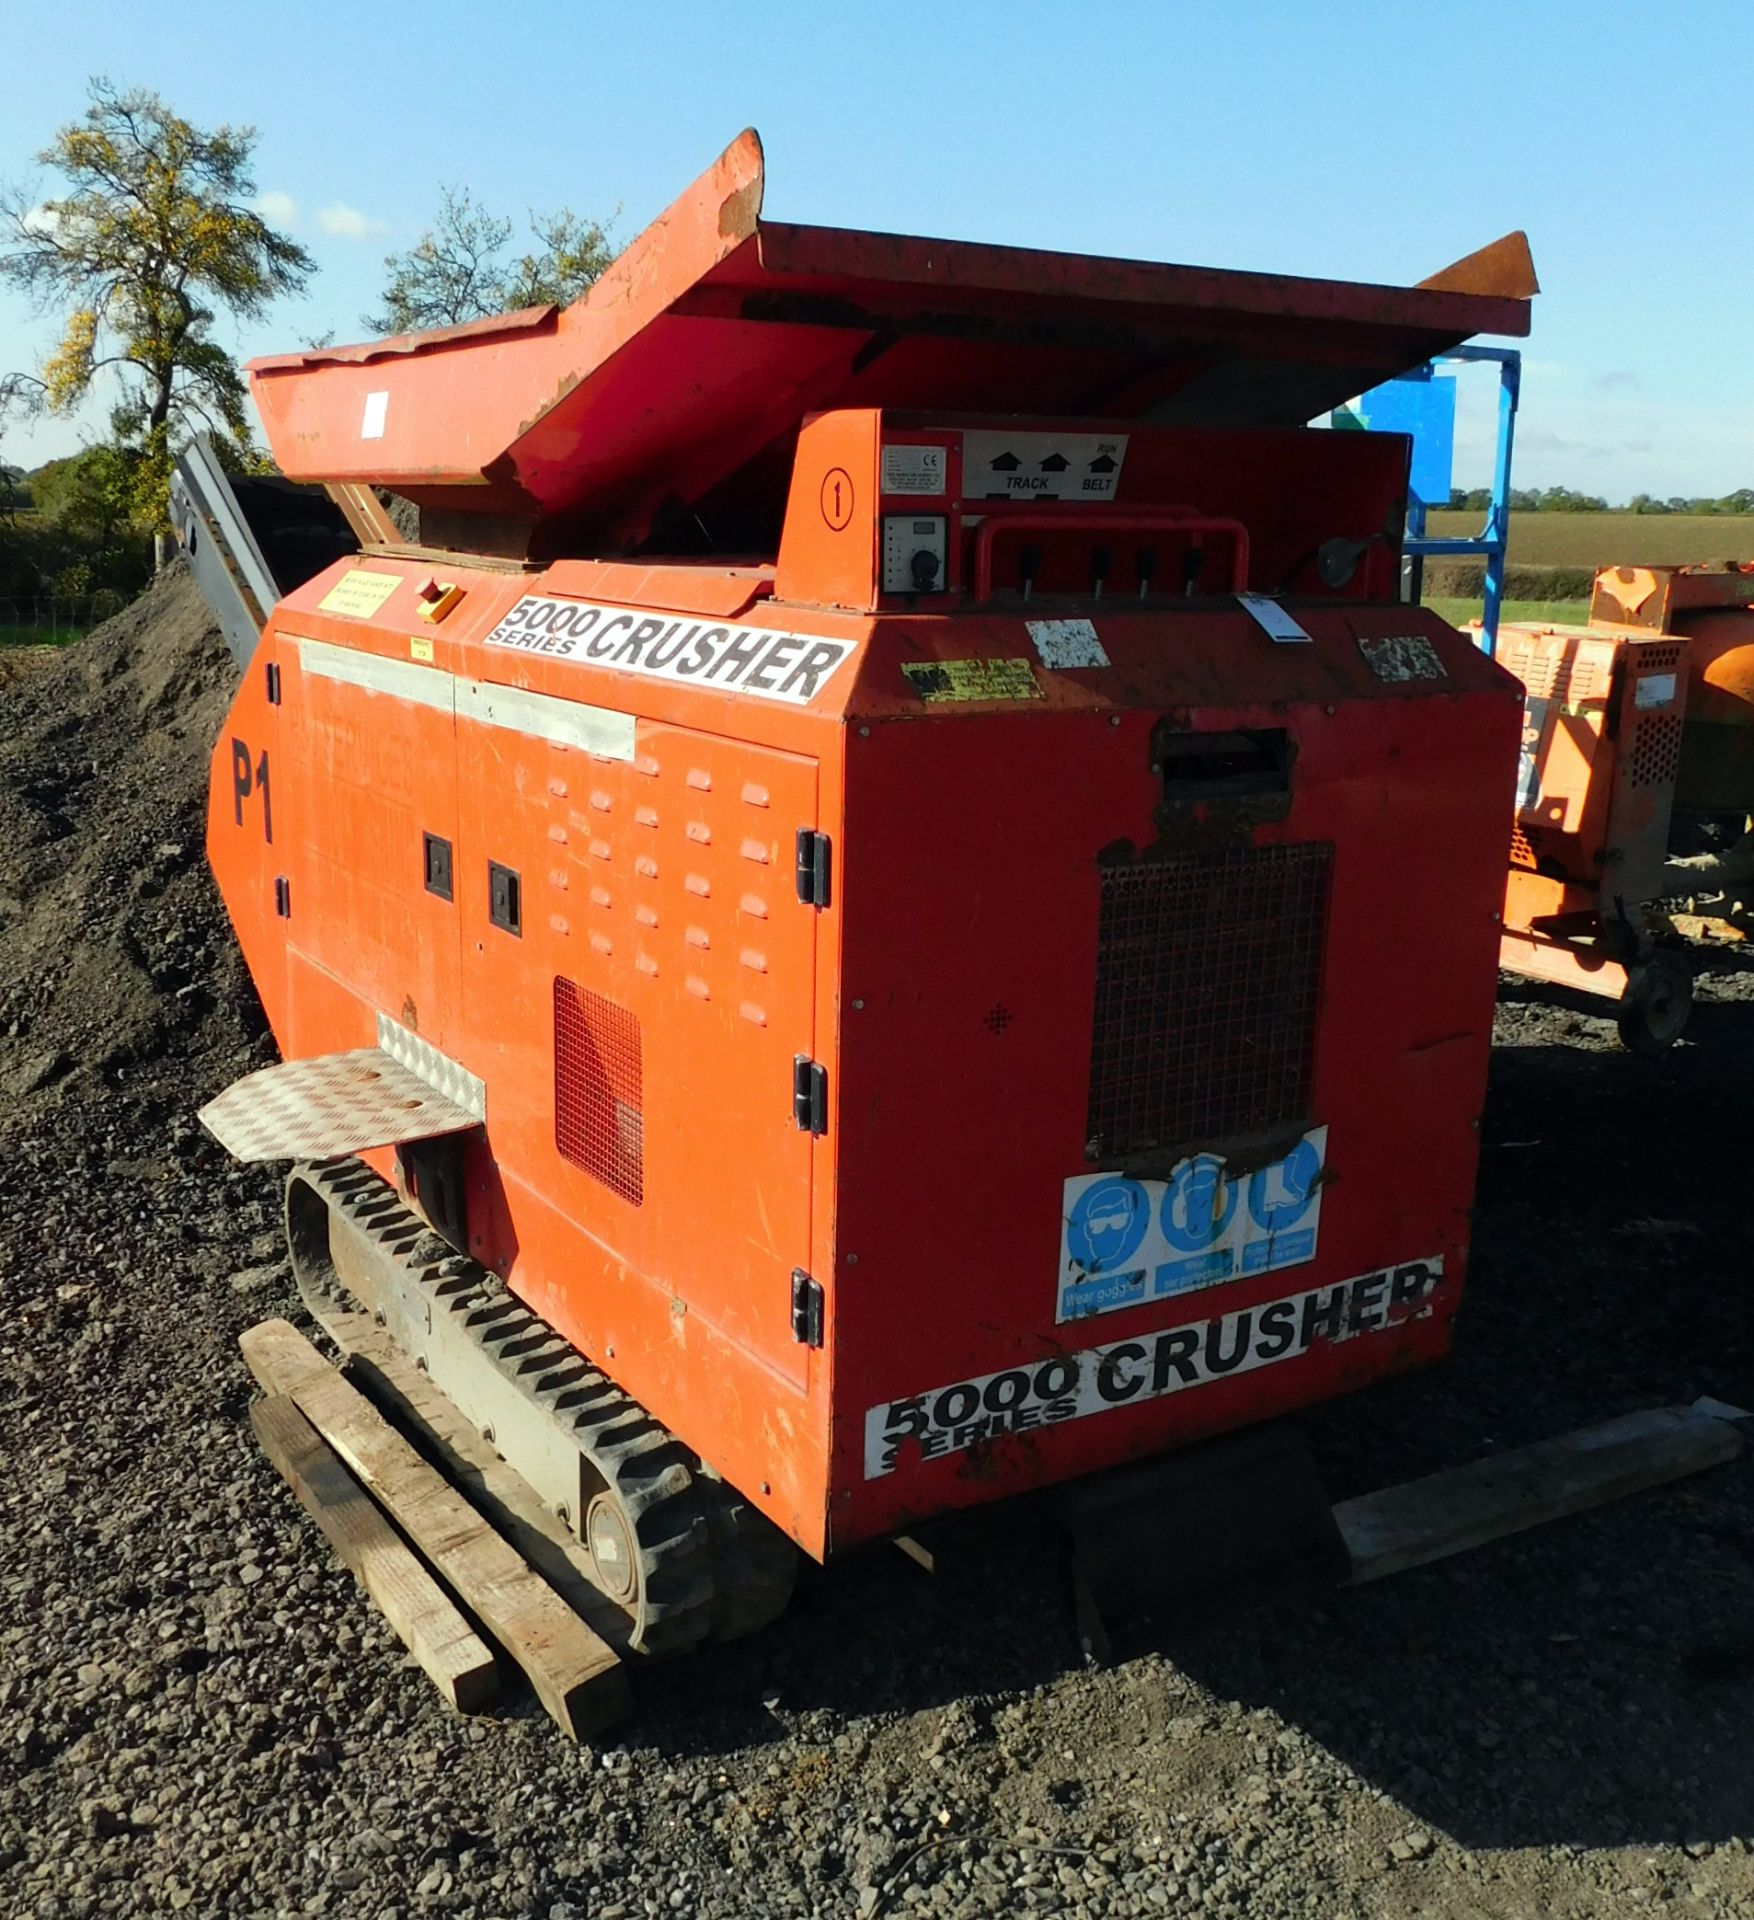 Red Rhino 5000T Crusher, serial number 060704 (2007) (Located Milton Keynes, Viewing by